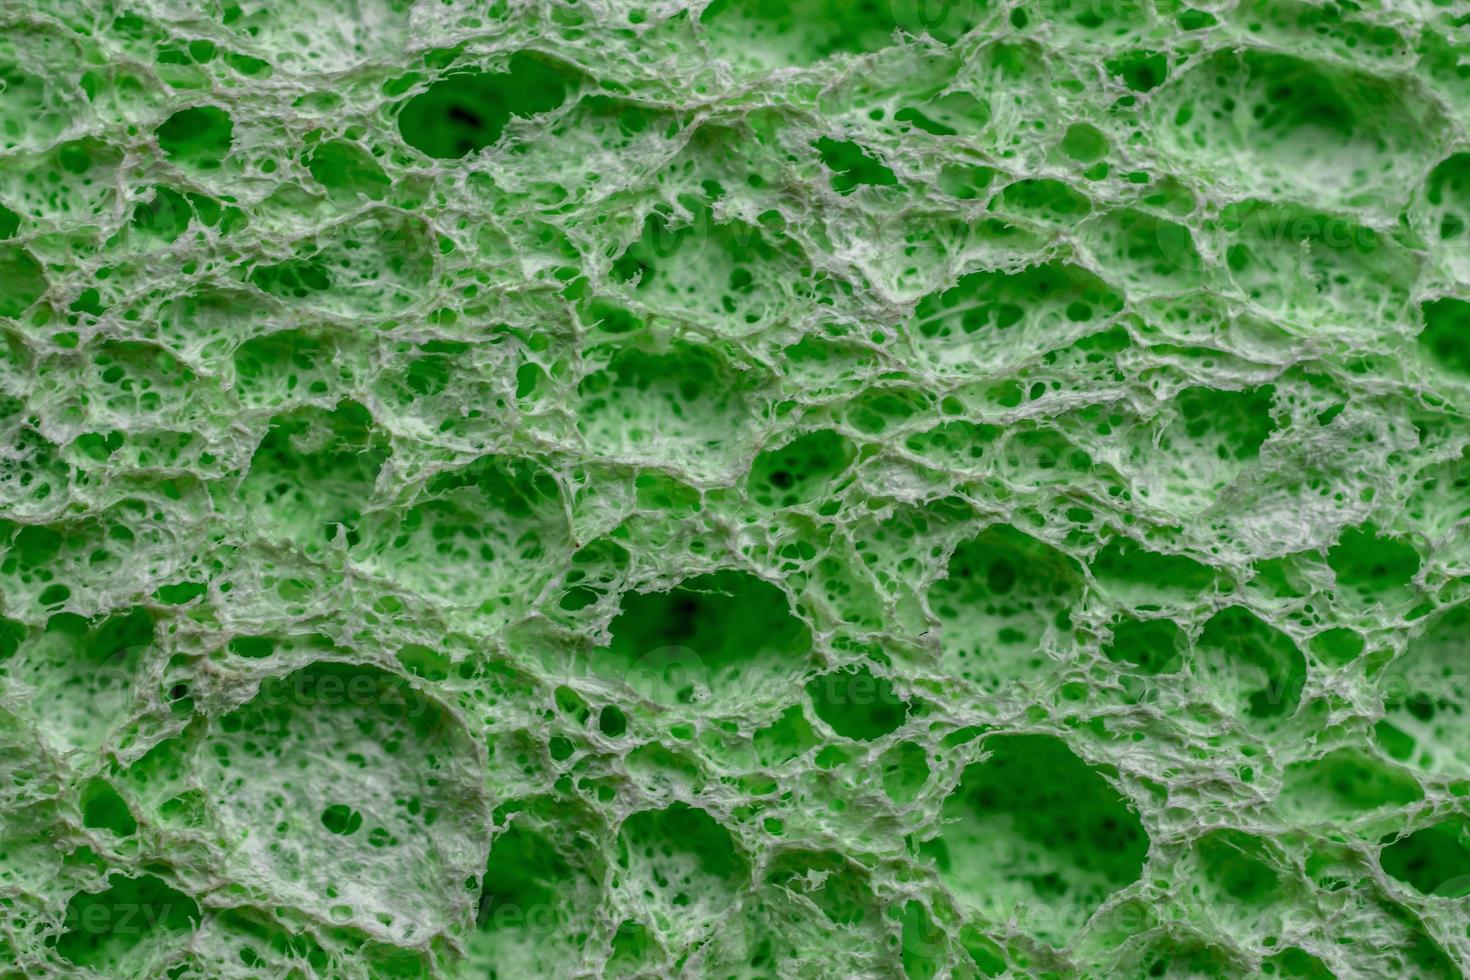 Sponge texture background. Green color cleaning sponge material detail close up view. Dish washing or beauty care. Macro photo